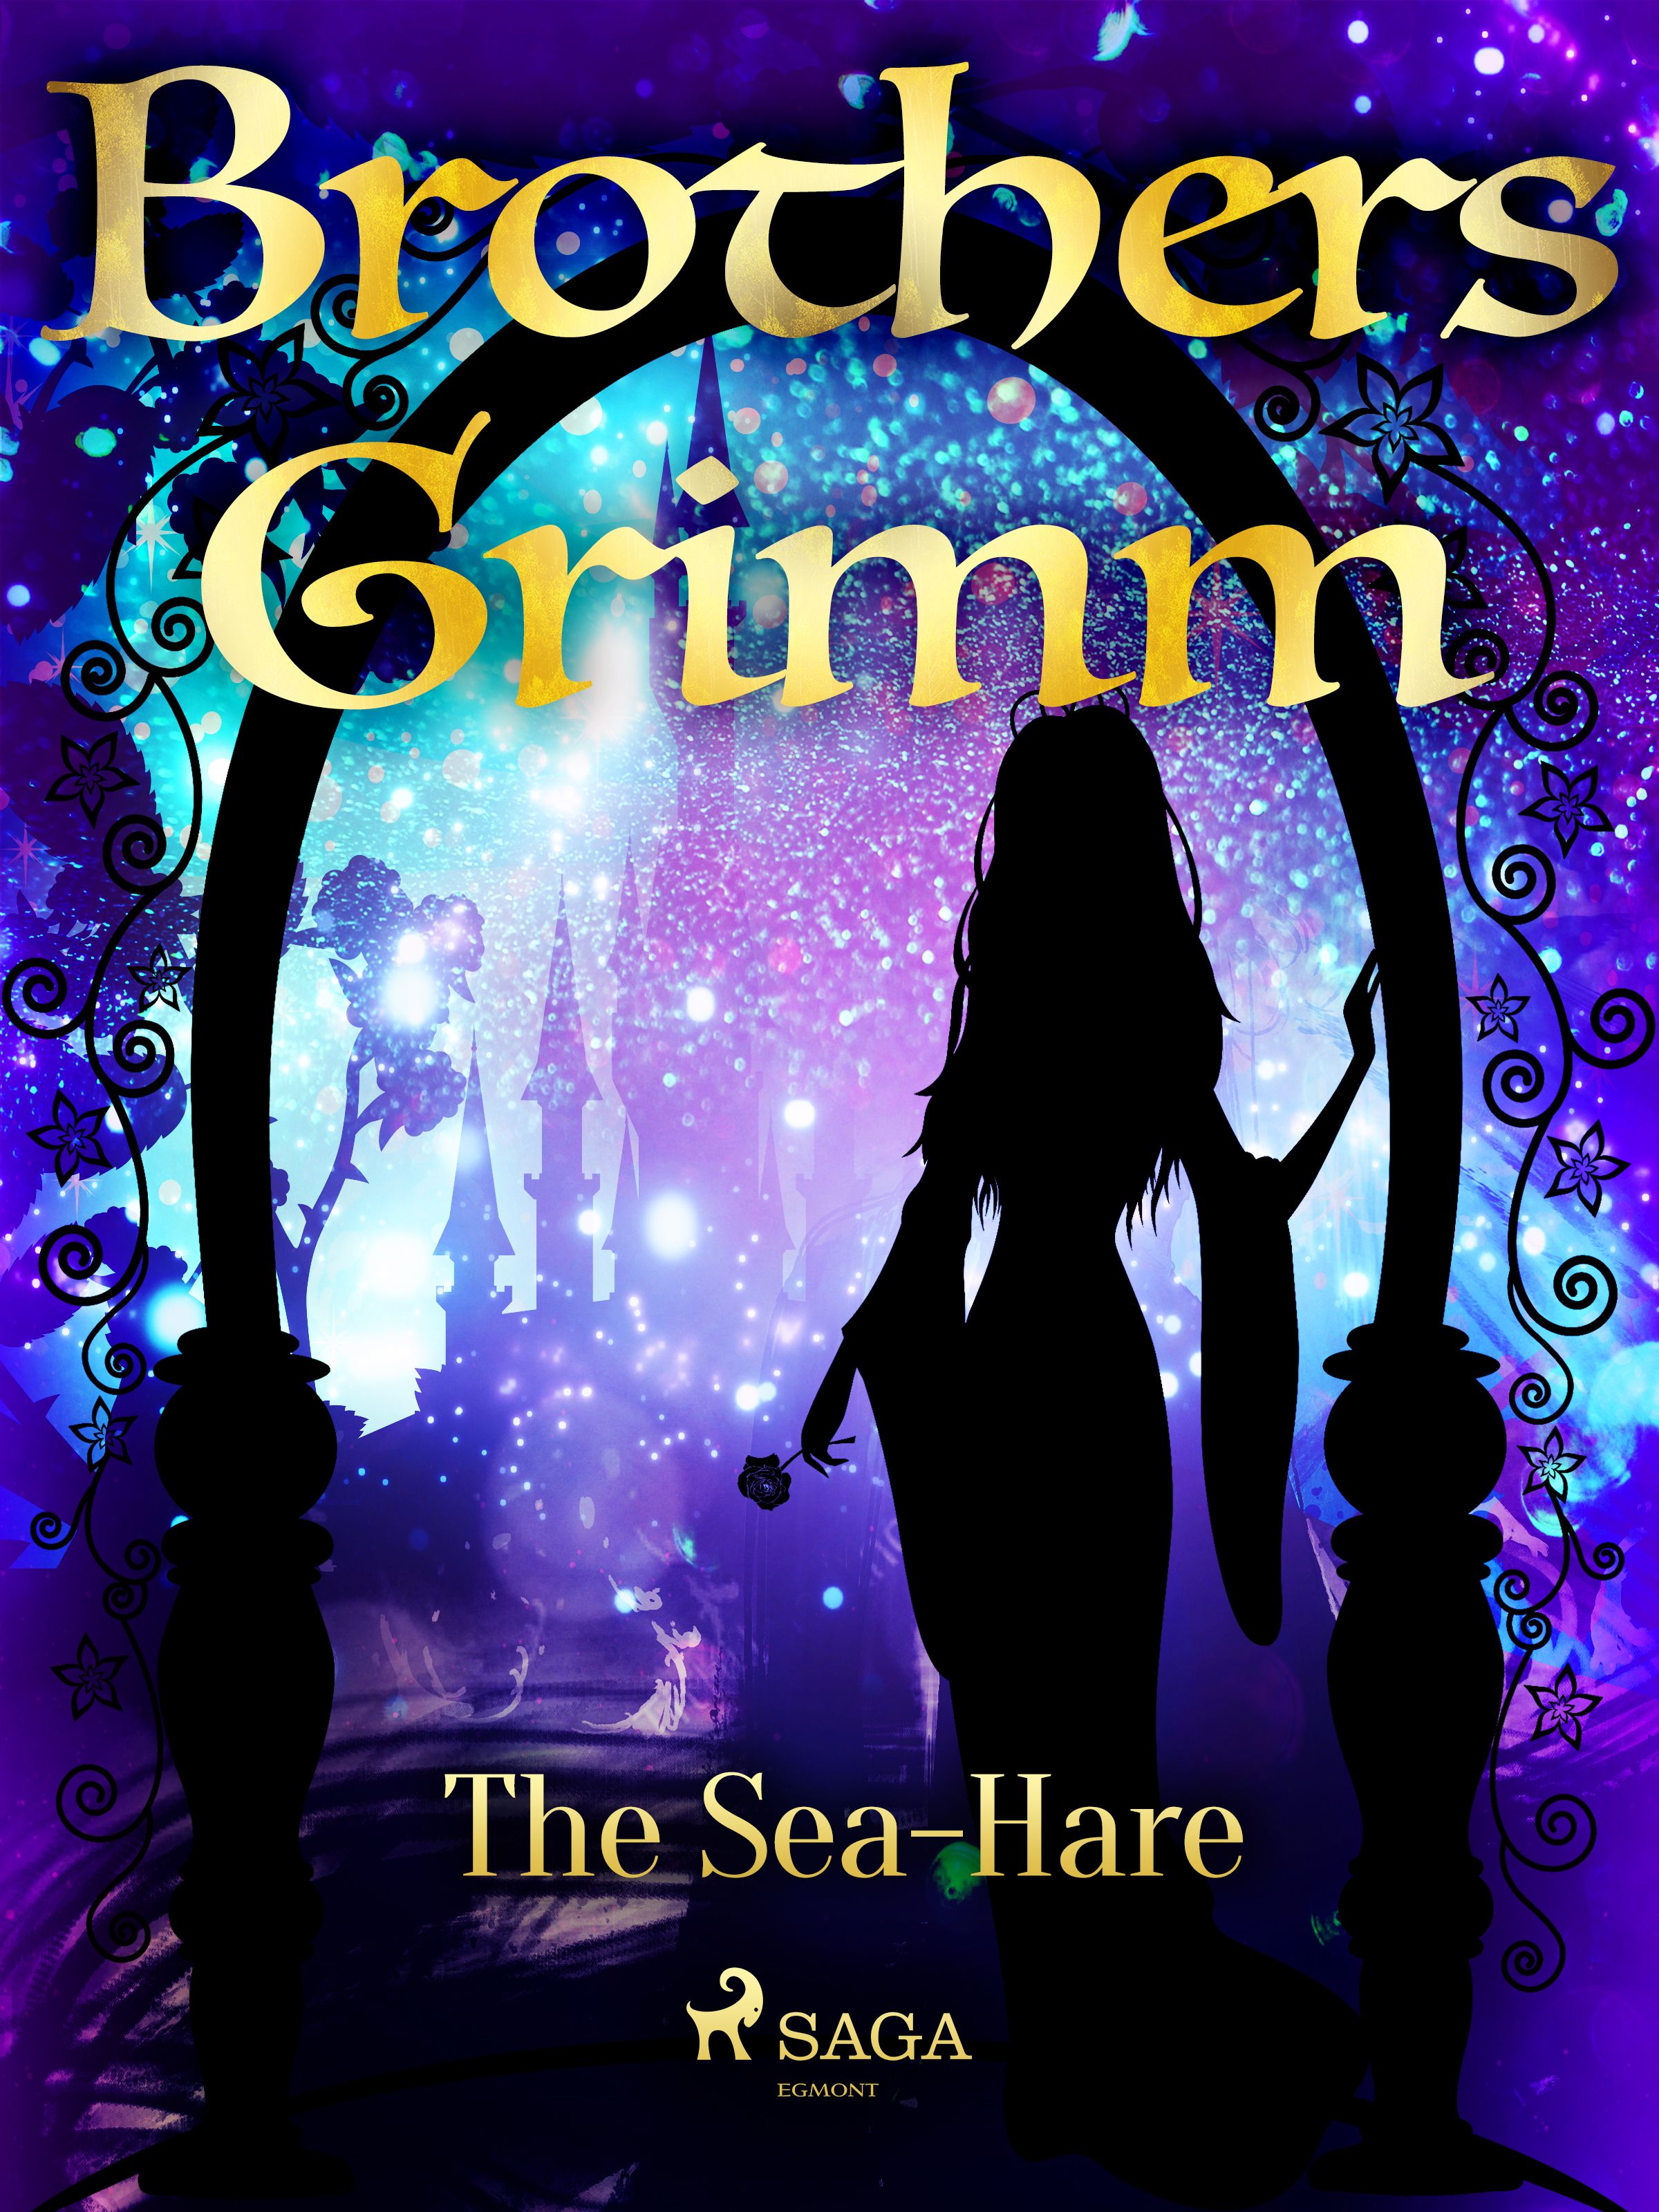 The Sea-Hare, eBook by Brothers Grimm